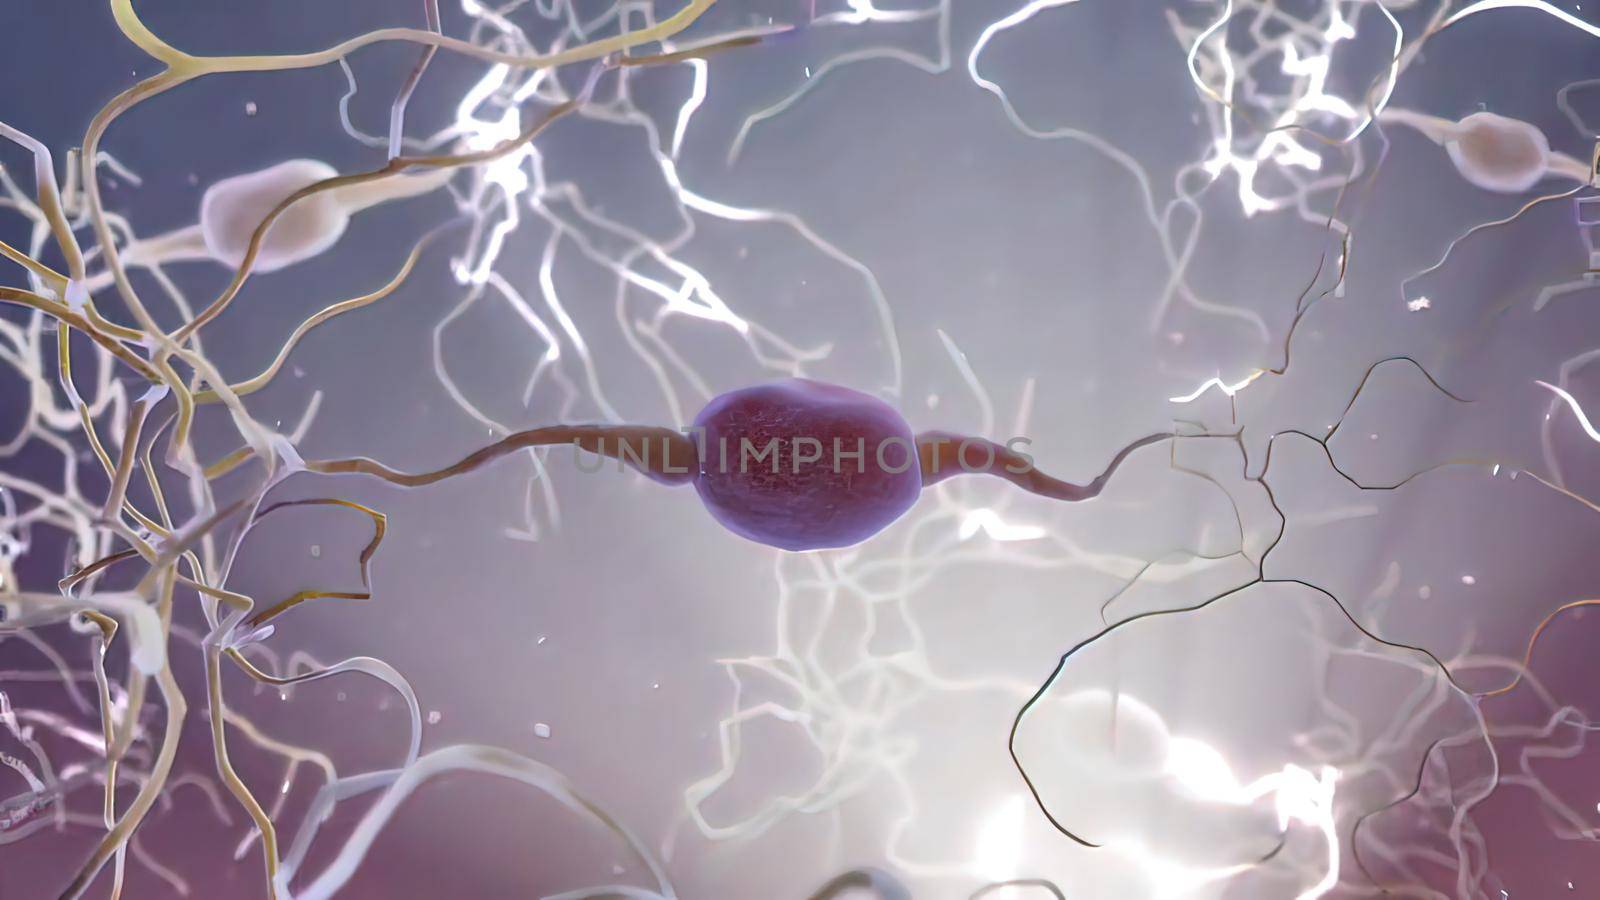 Intro Brain Impulses. Neuron System. Transferring Pulses And Generating .From neurons during synapsis to a human head. 3d illustration